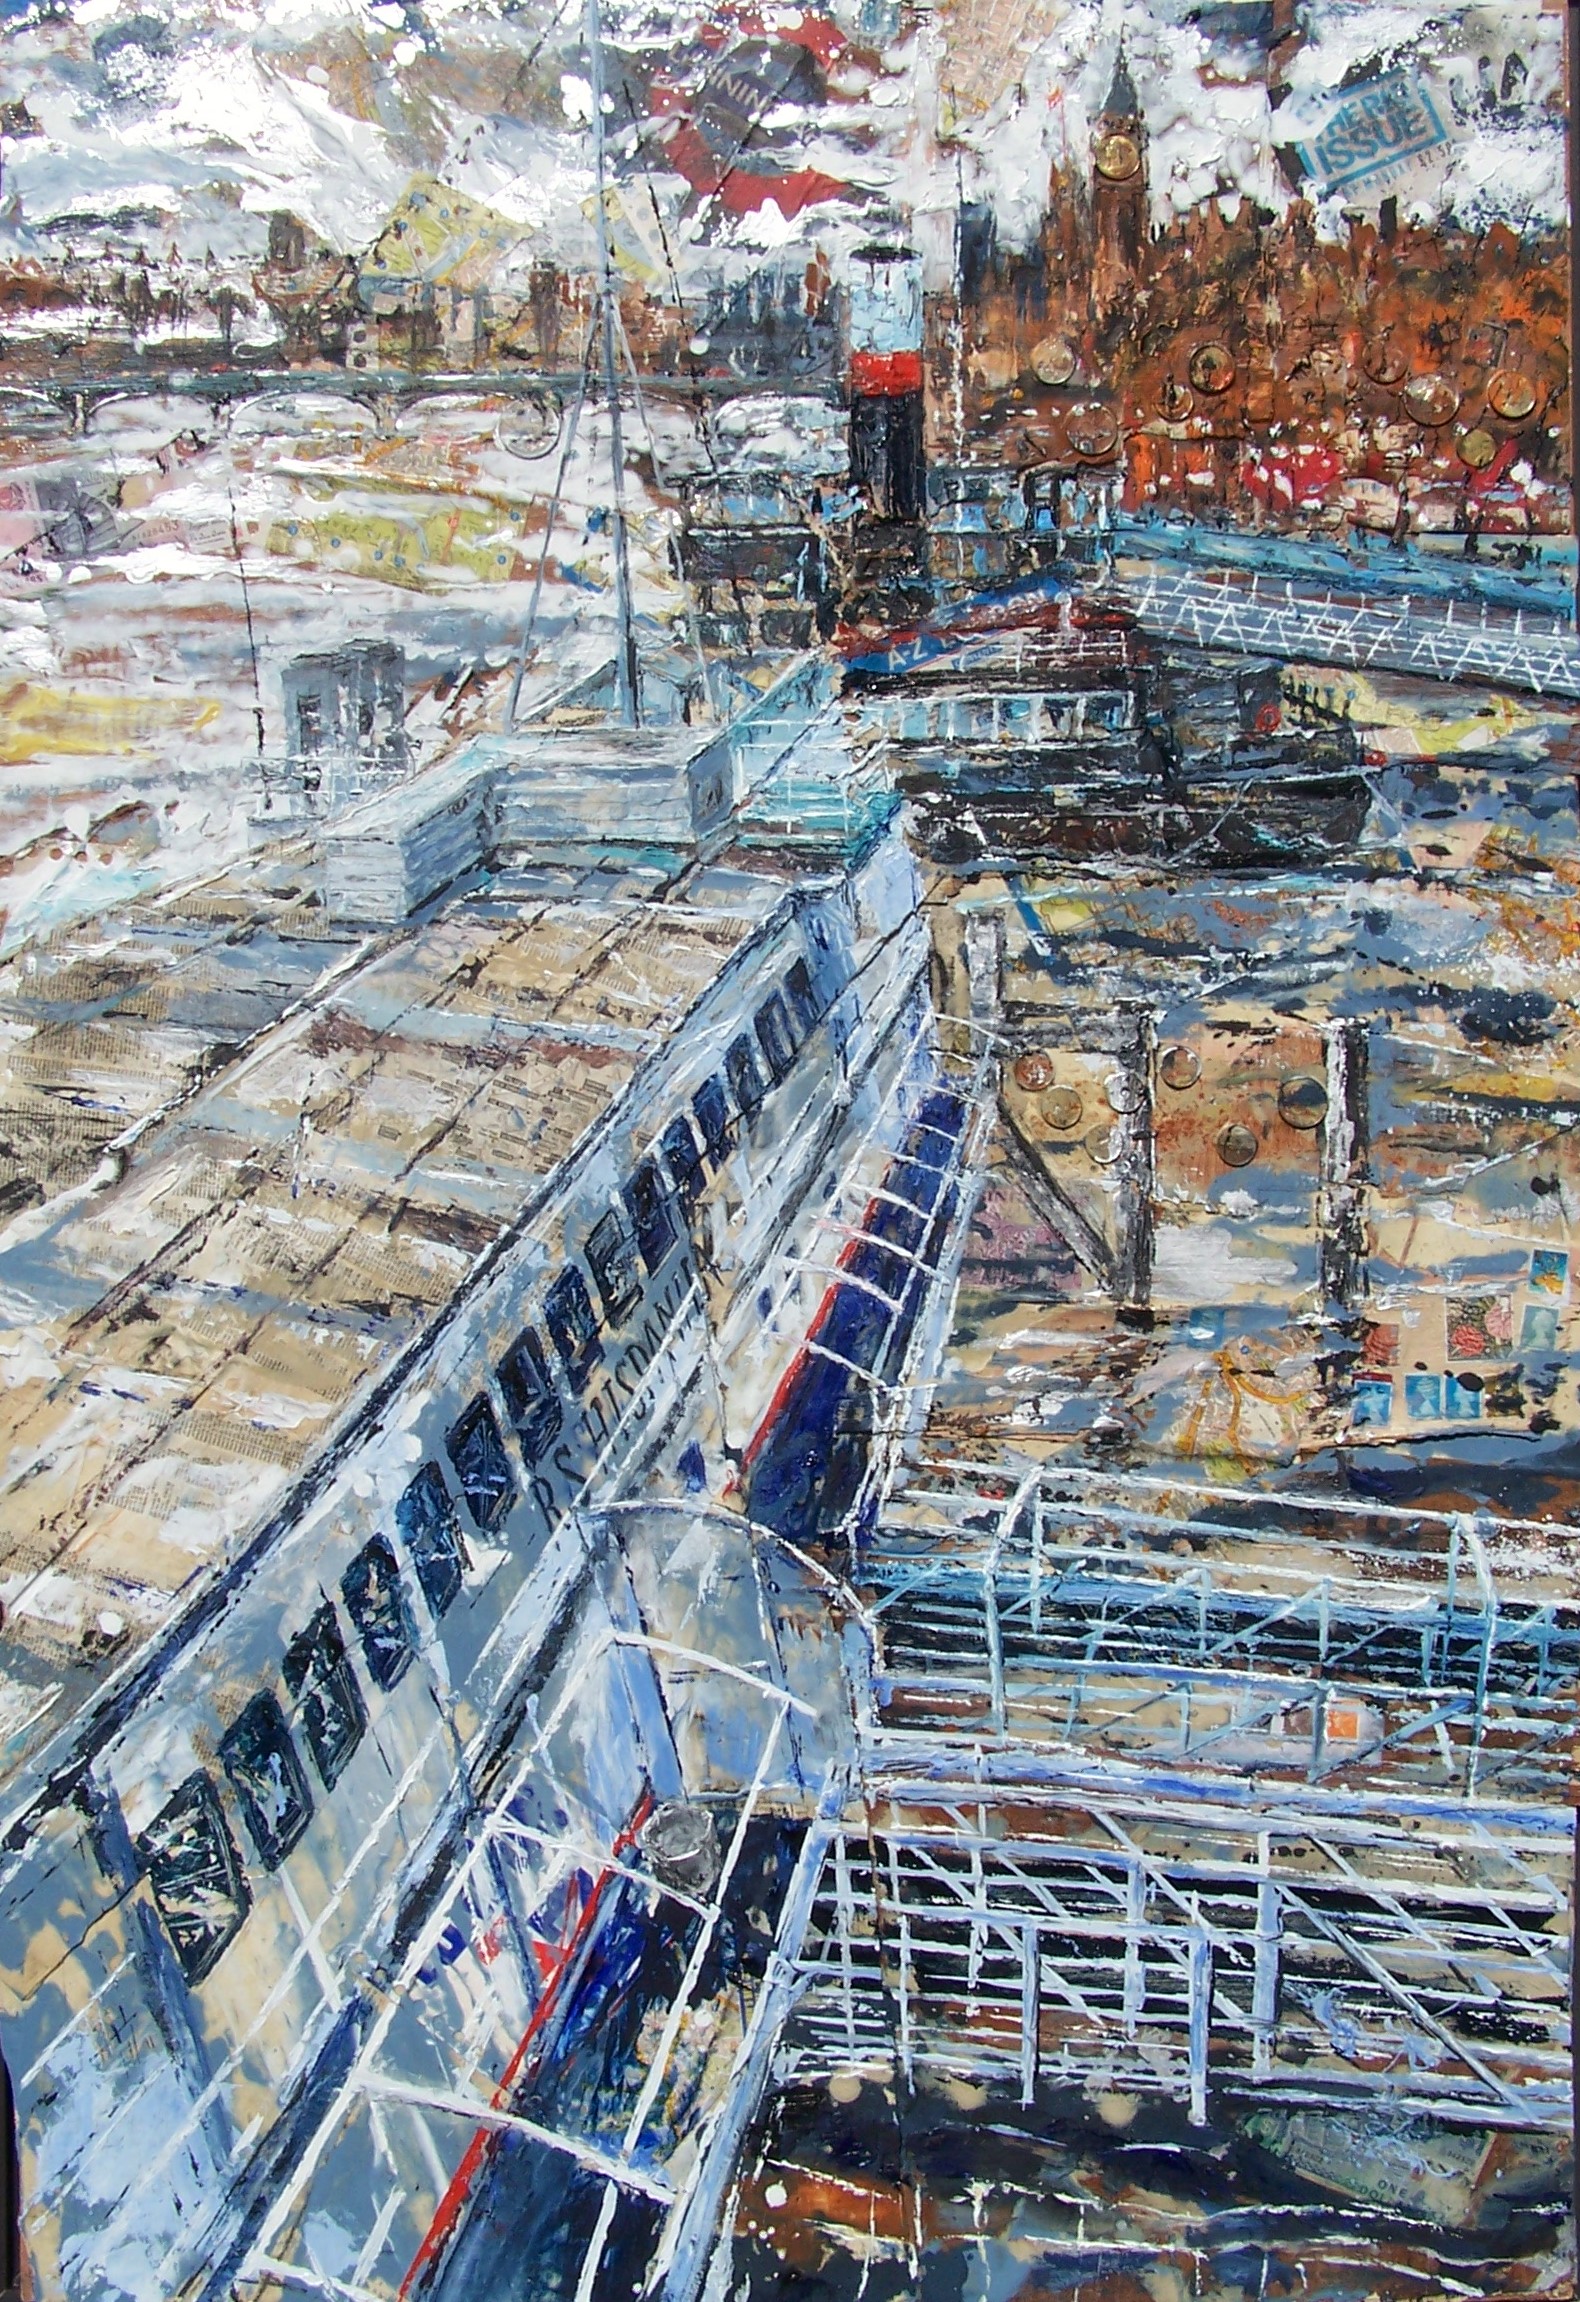 R.S Hispaniola, Thames, Oil paint and collage on wood